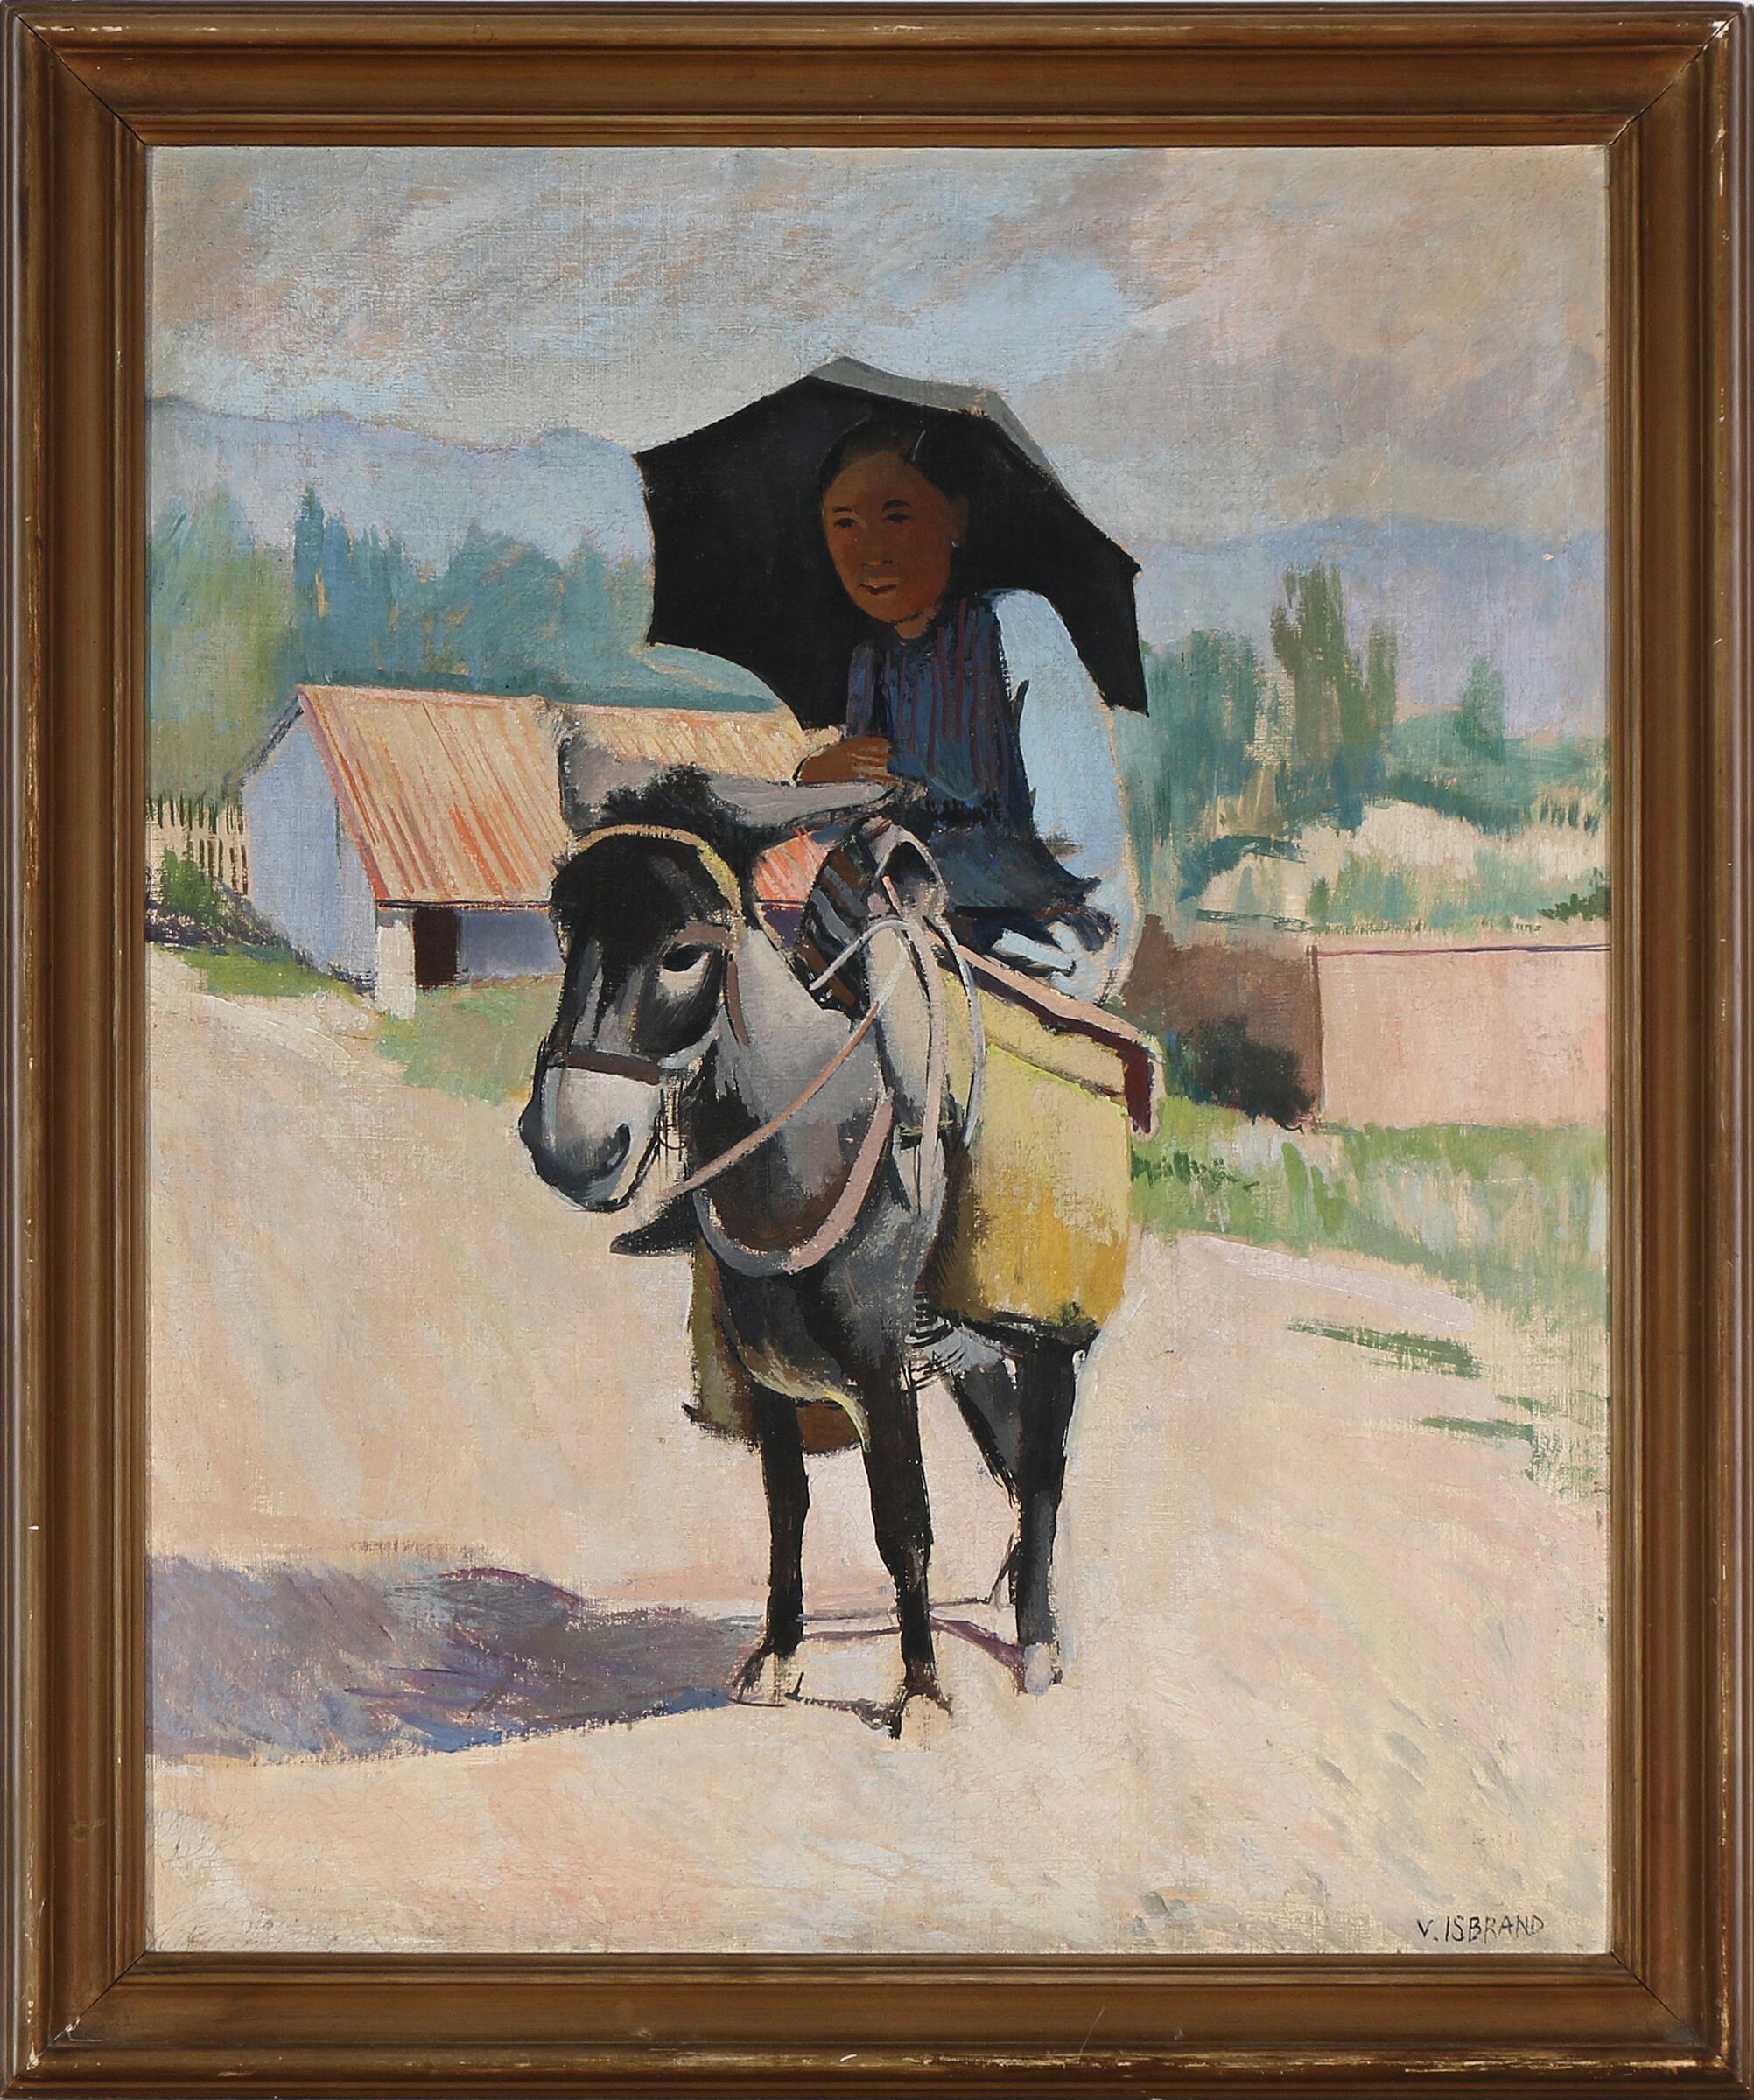 Girl in Java, riding on the donkey by Danish artist Victor. Isbrand, signed. Oil on canvas. Size: 86 × 69 cm.

Victor Isbrand (b. København 1897, d. s.p. 1989).